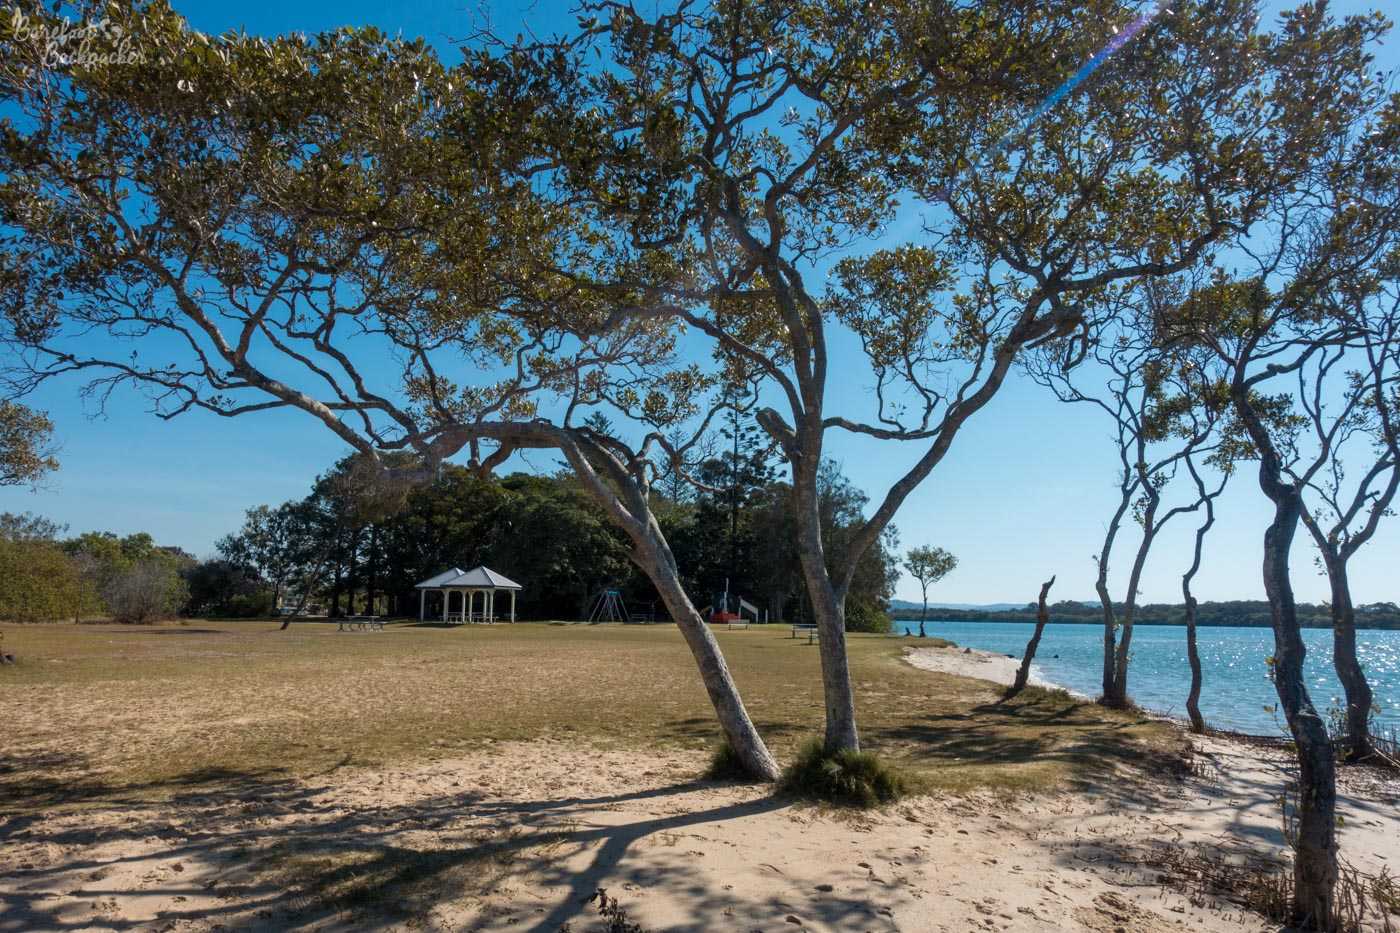 Chamber's Island. Pic is taken from under the trees. The mouth of the Maroochy river is on the right, next to a small beach (it's bigger behind me). In the centre distance, on the grass, are a couple of shelters, a set of swings, and some picnic tables. Behind them are more trees. There's no-one else here.